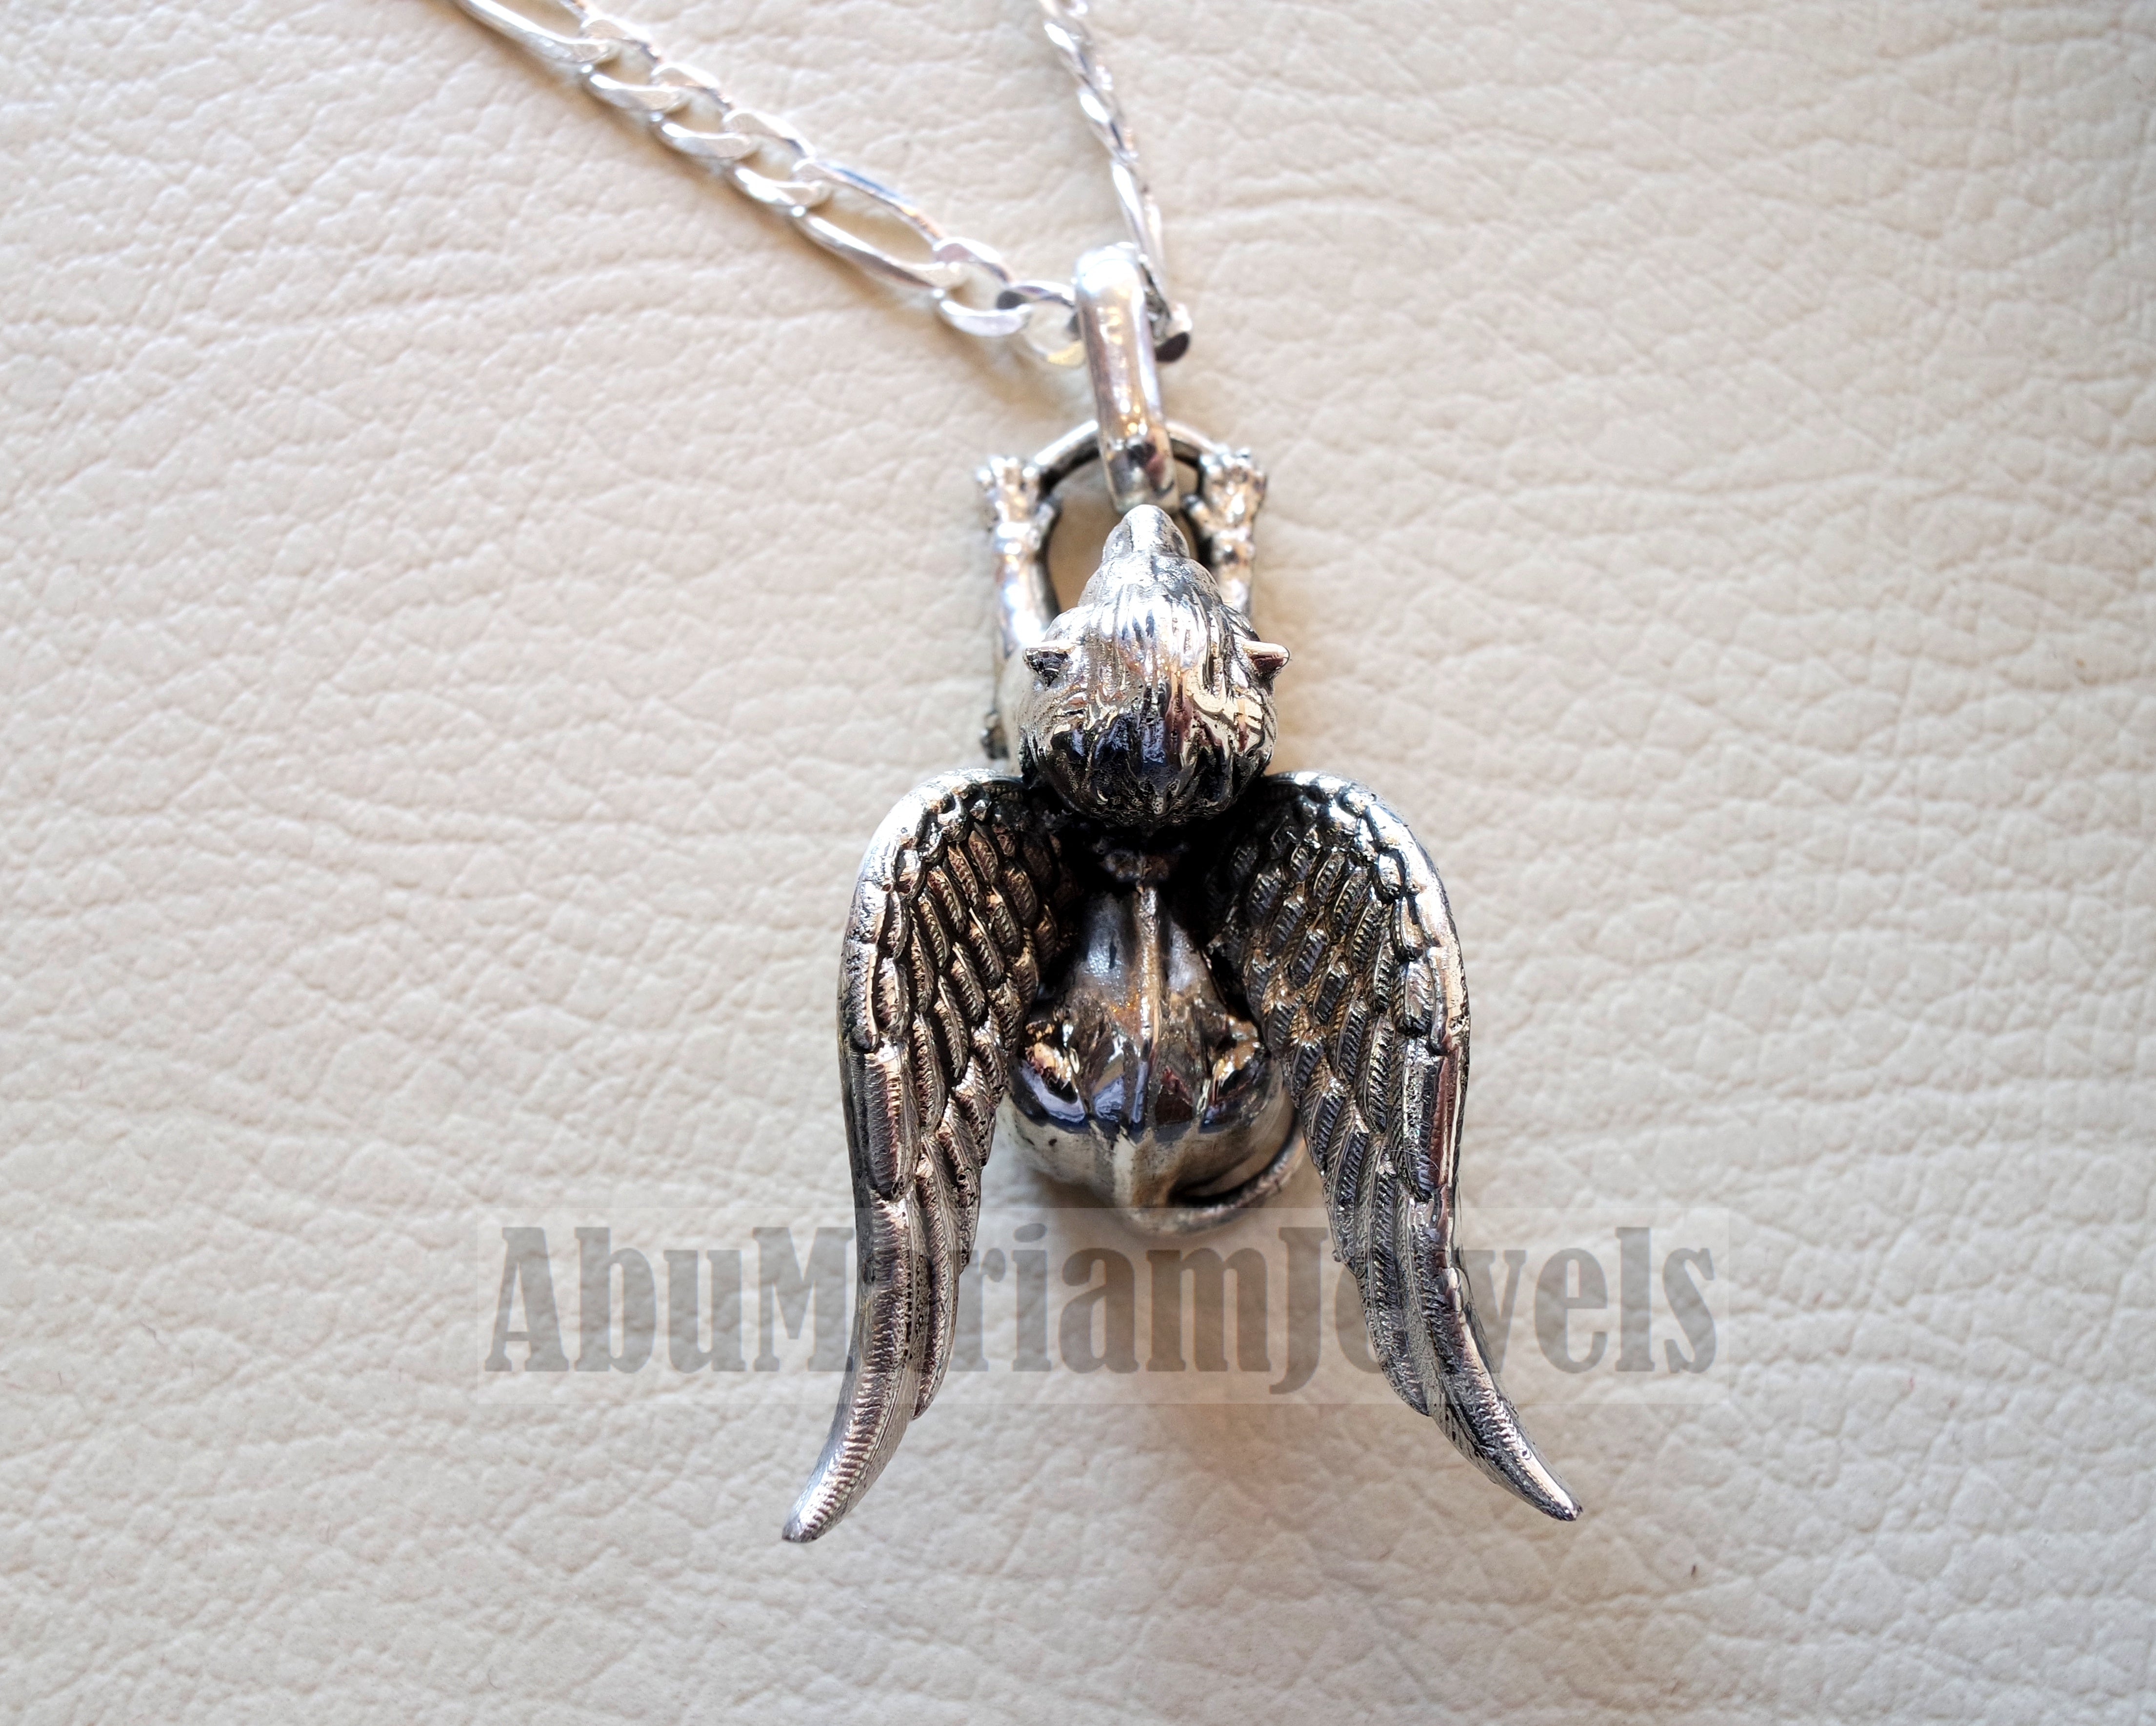 Huge Babylon lion 3D historical mythical winged lion the symbol of ultimate power pendant with thick chain sterling silver 925 griffin gryphon jewelry